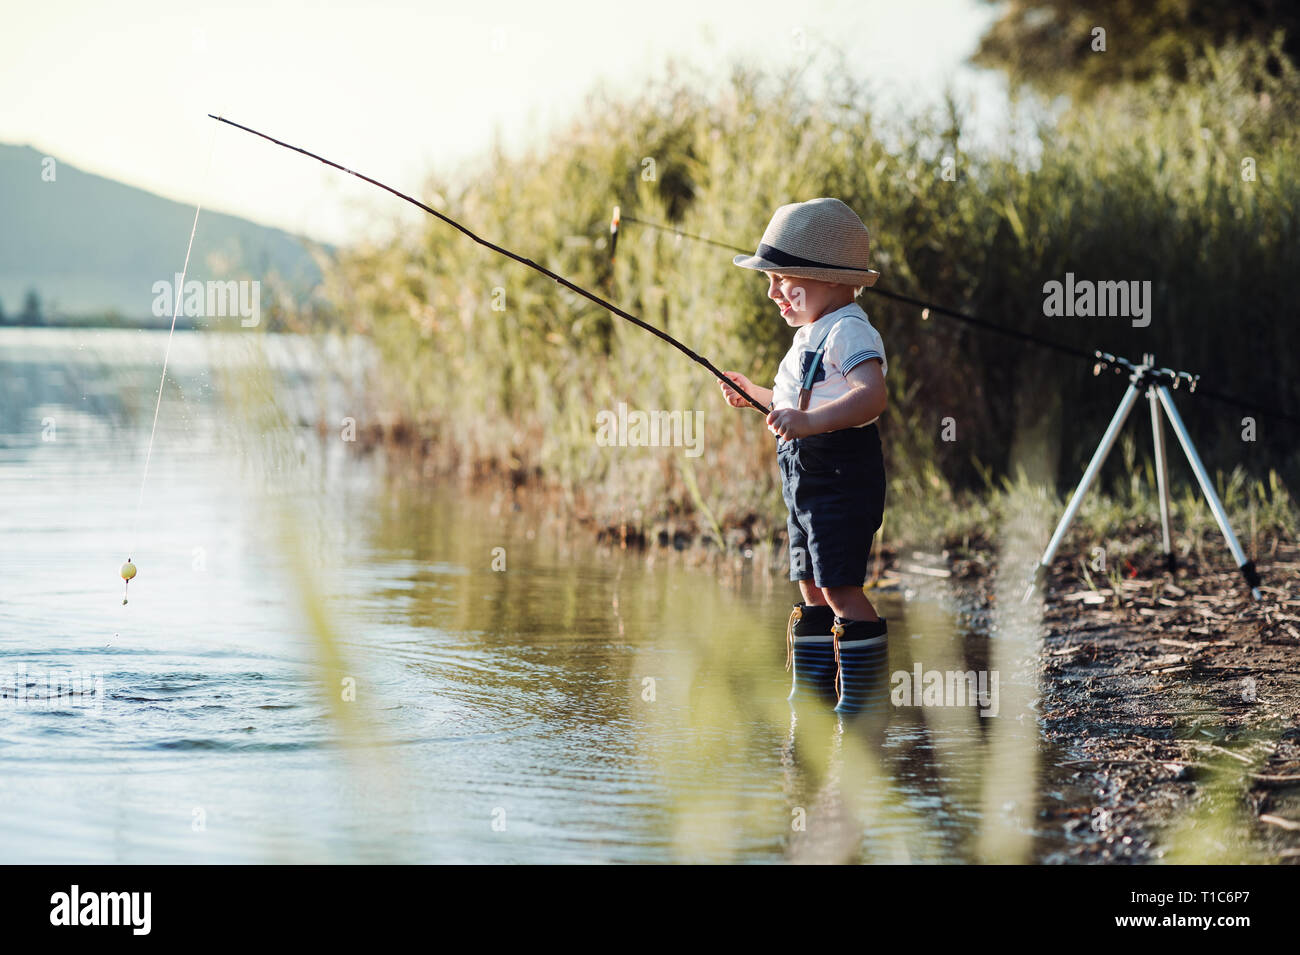 A small toddler boy standing by a lake at sunset, fishing. Copy